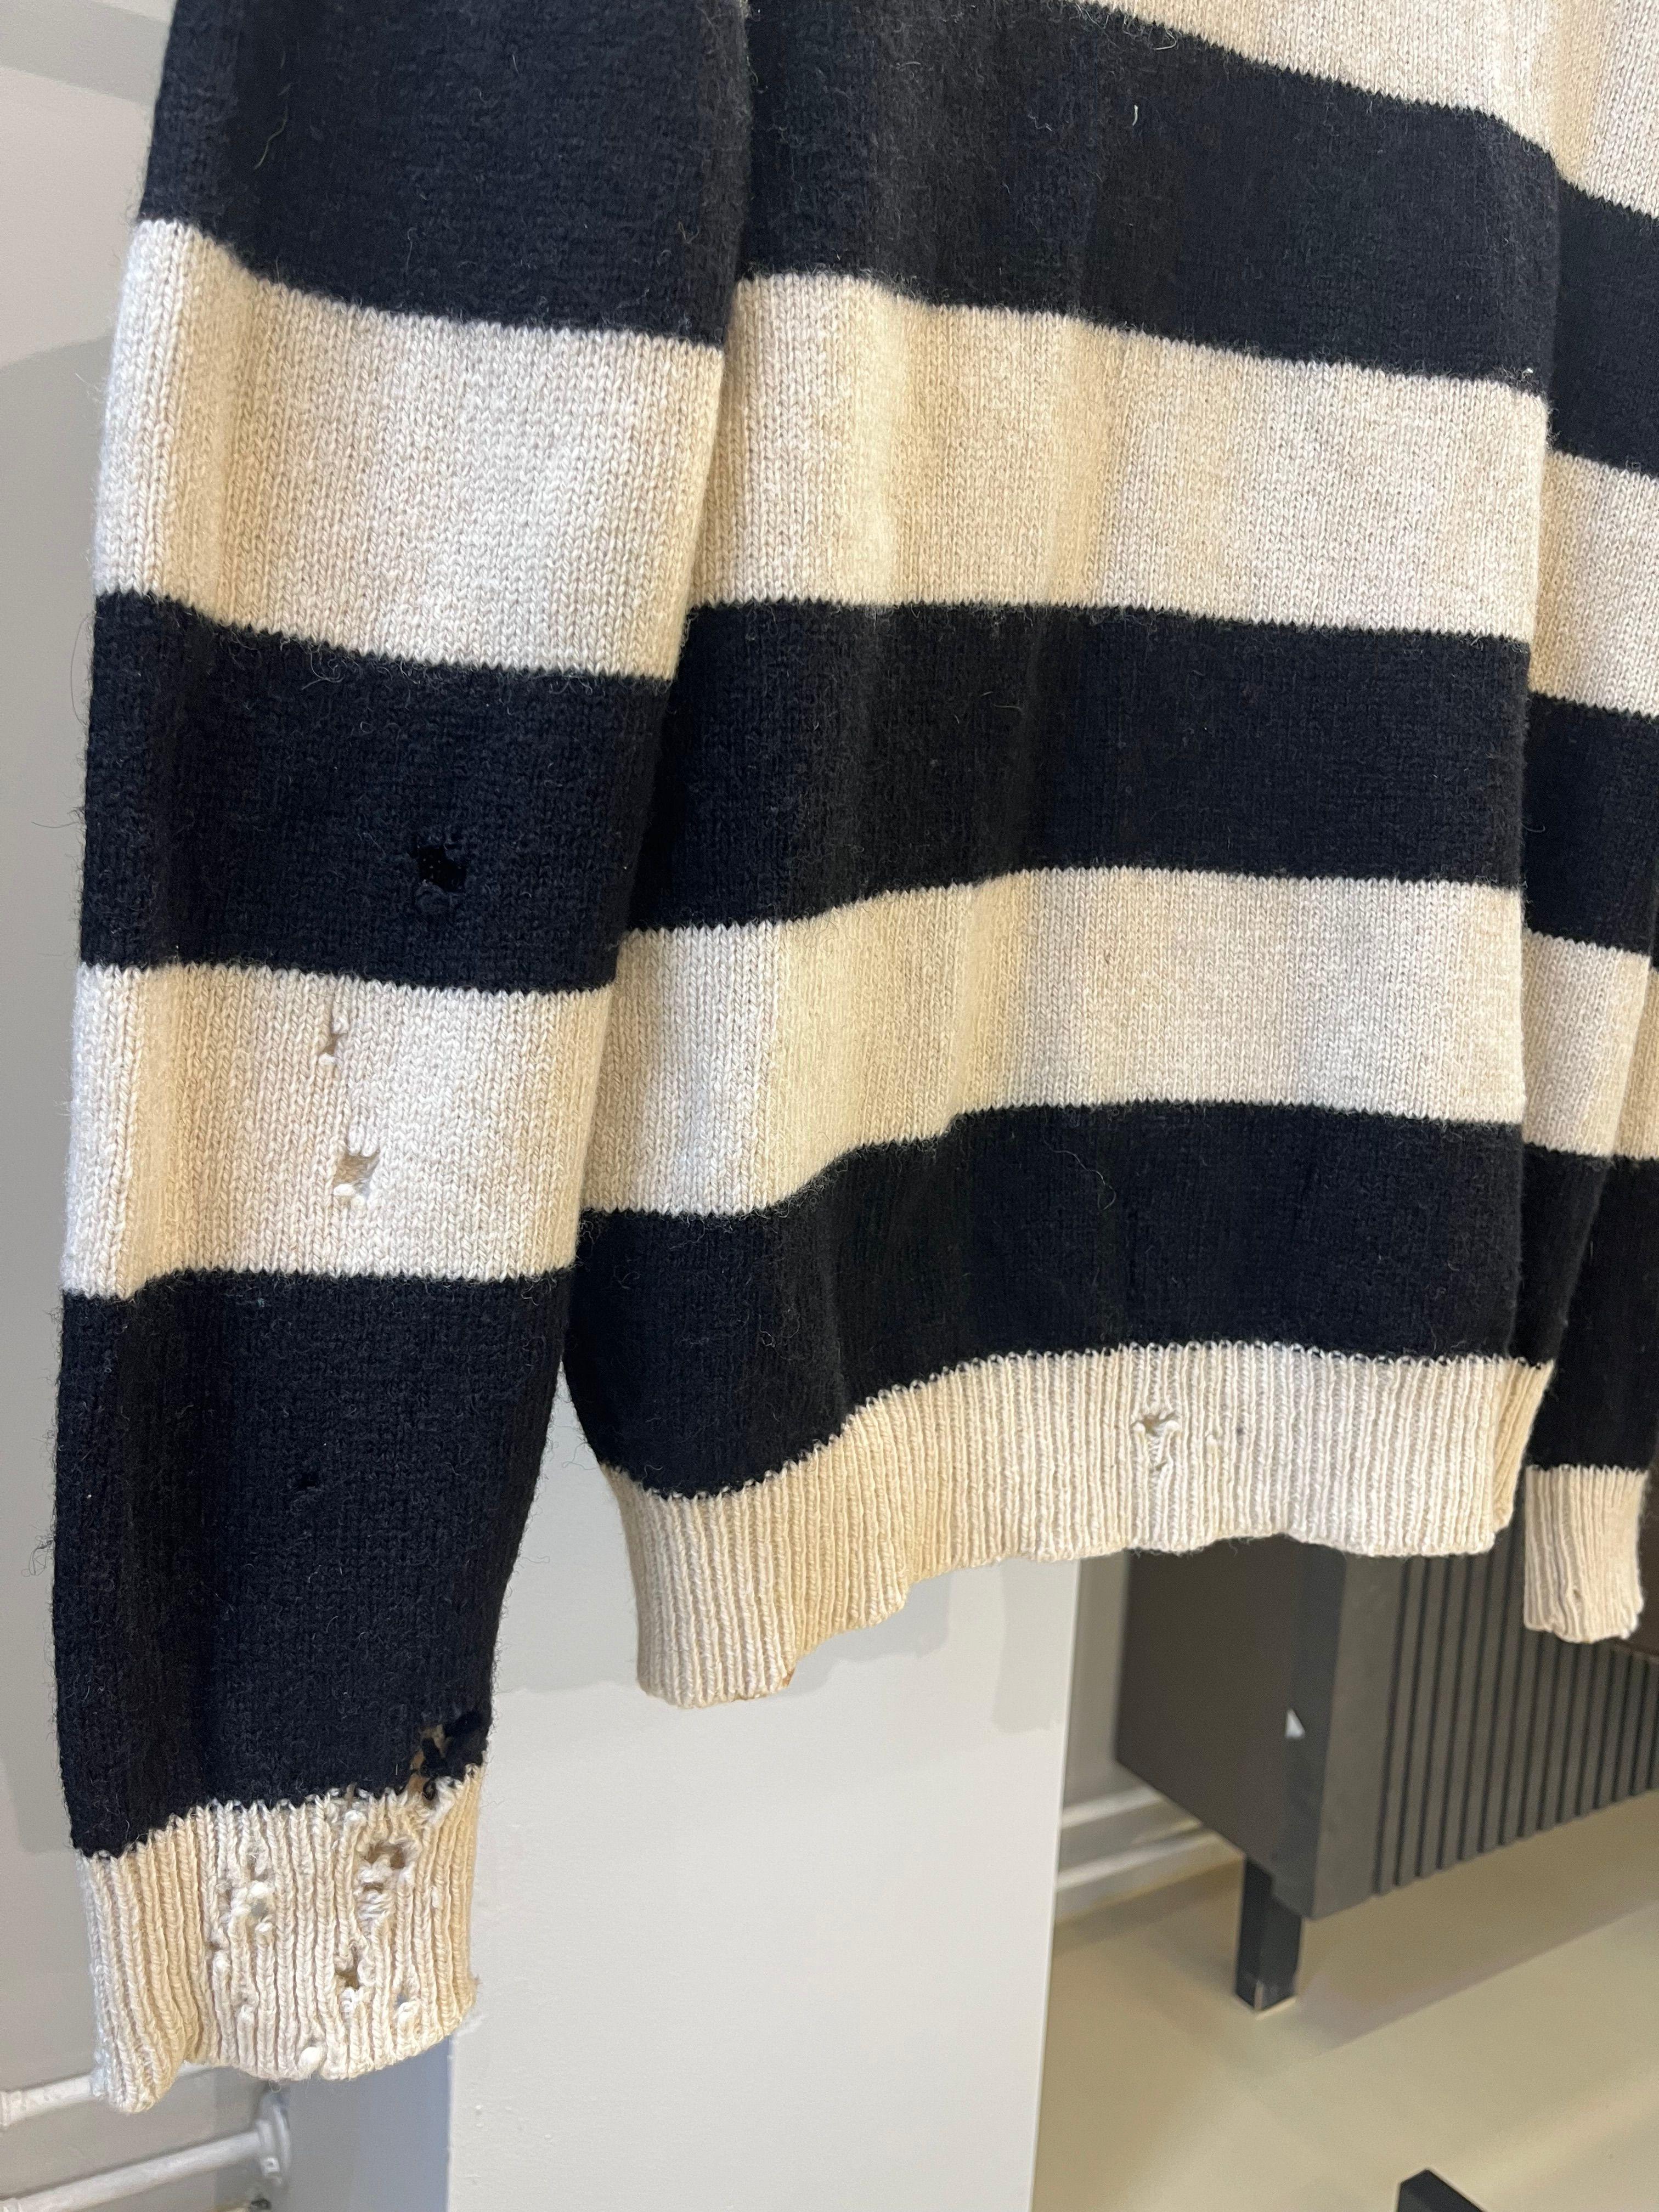 Raf Simons
AW 2001 Riot Riot Riot Distressed Knit Sweater
Size 52

Beautiful Raf Simons distressed knit sweater from his famous 2001 autumn winter collection 'Riot Riot Riot'. Very rare distressed version, in great condition please refer to the